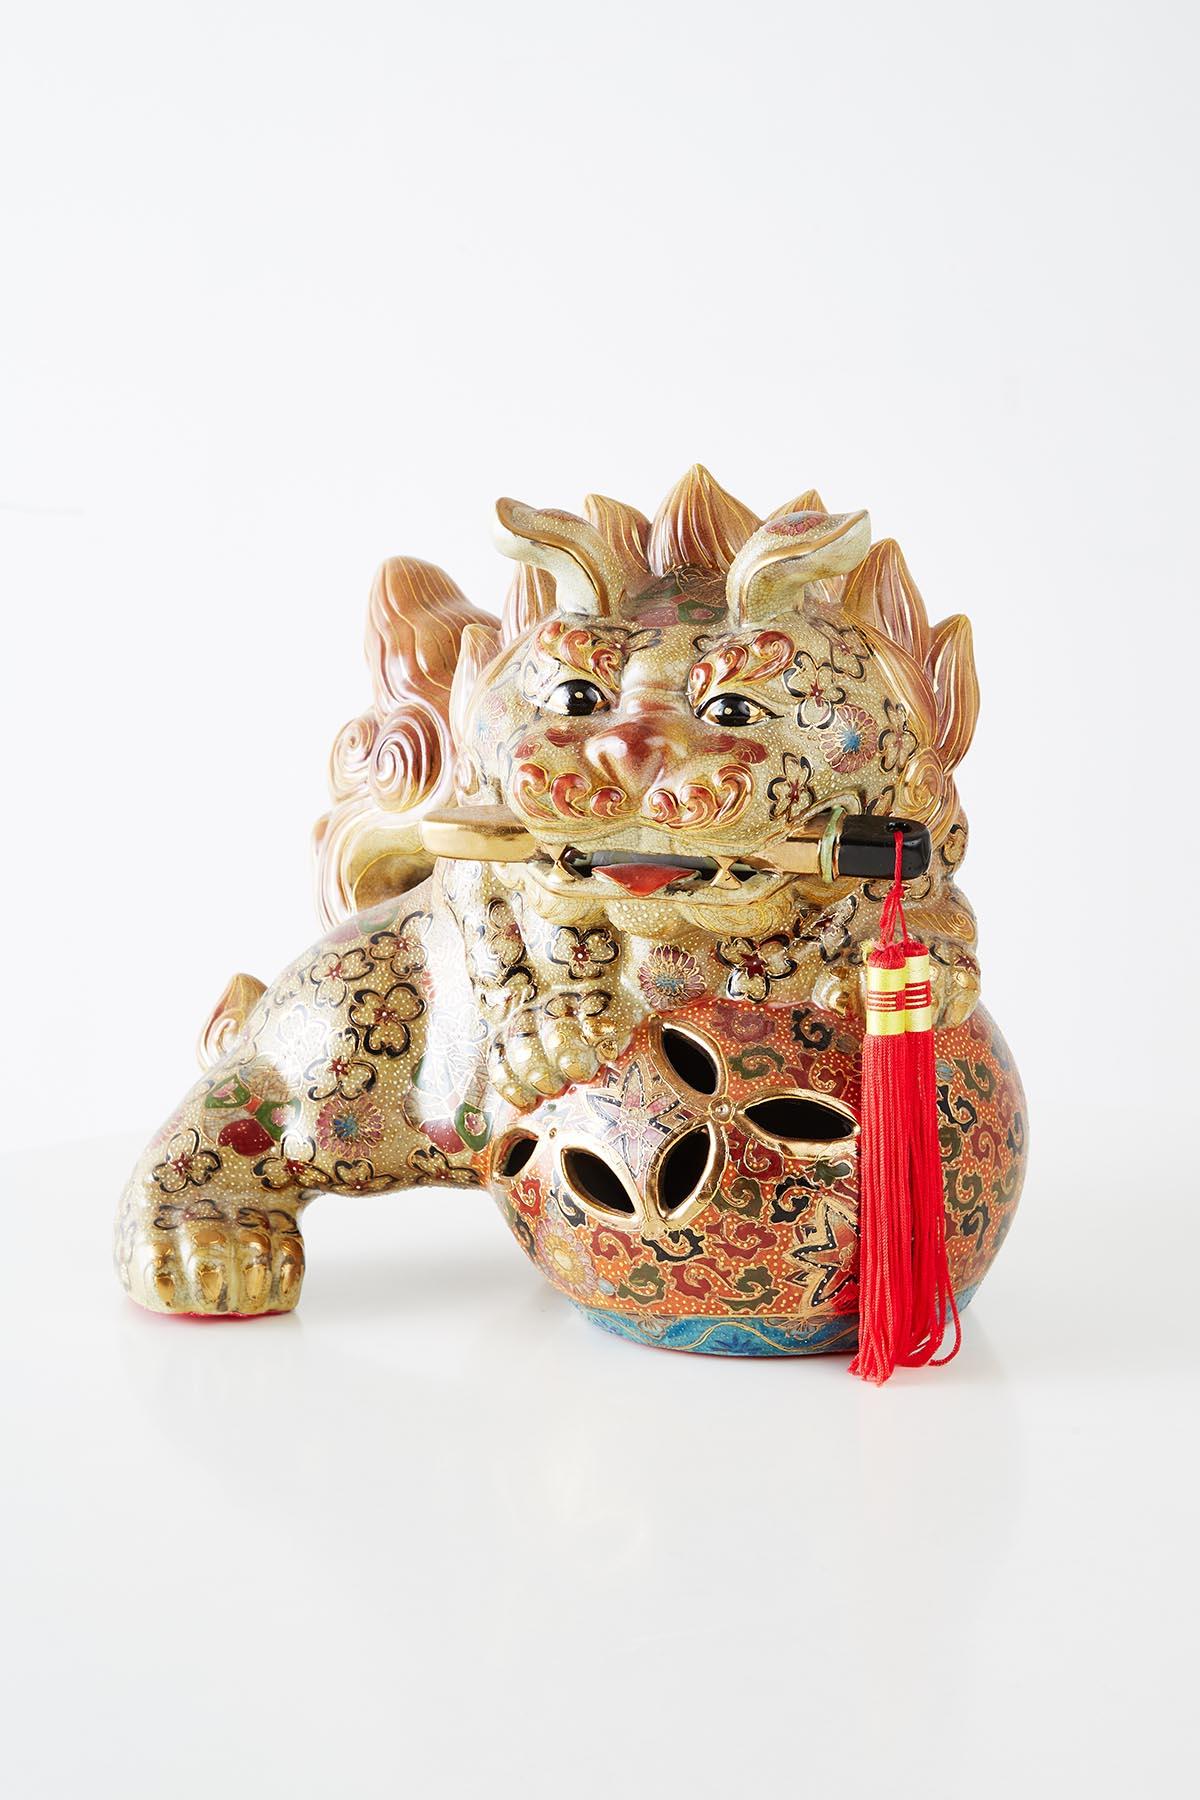 Pair of satsuma style gilt porcelain style foo lions. Each lion having a dagger in its jaw and paws on a ball with red tassels. Beautiful hand-painted details in golds, reds, browns and cream.